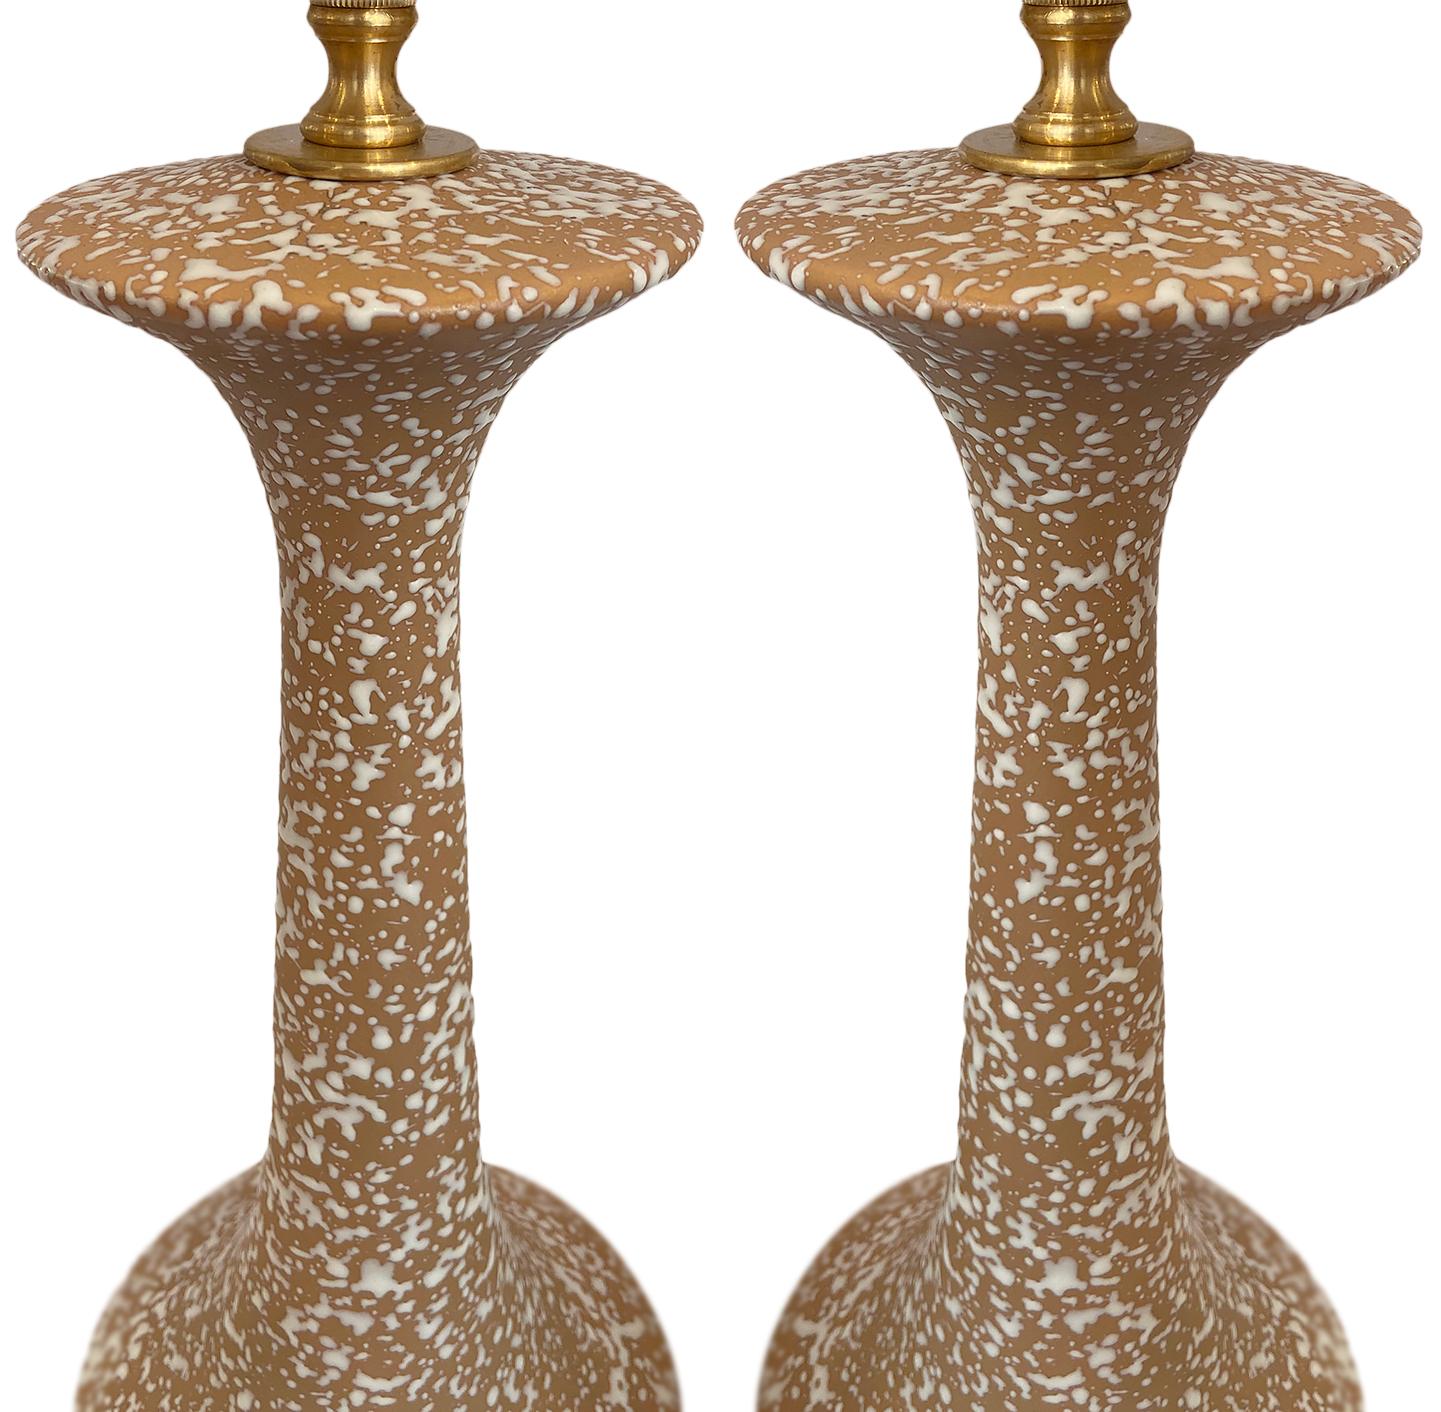 A pair of circa 1940's Italian porcelain lamps.

Measurements:
Height: 19.5